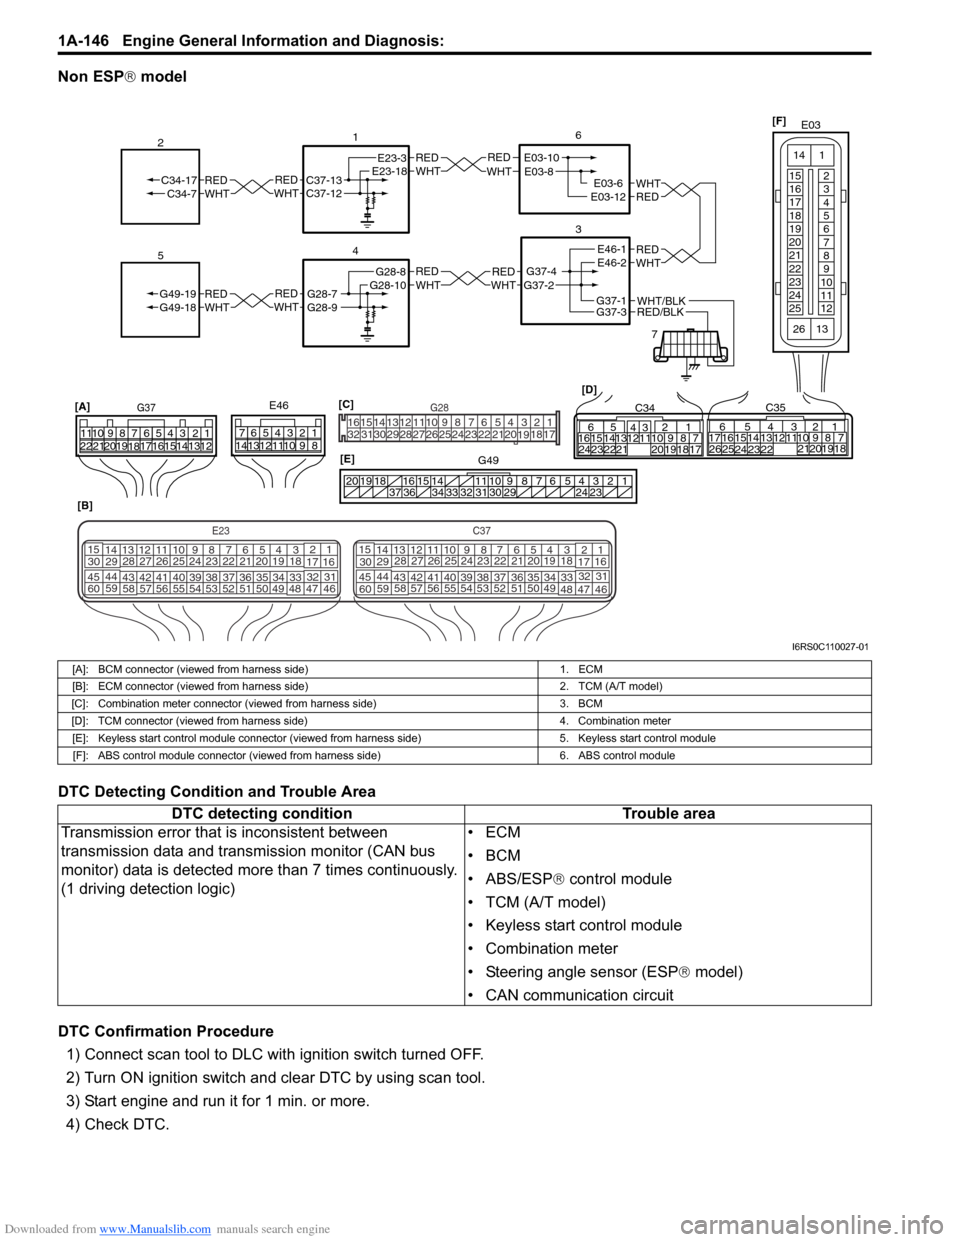 SUZUKI SWIFT 2008 2.G Service Workshop Manual Downloaded from www.Manualslib.com manuals search engine 1A-146 Engine General Information and Diagnosis: 
Non ESP® model
DTC Detecting Condition and Trouble Area
DTC Confirmation Procedure 1) Connec